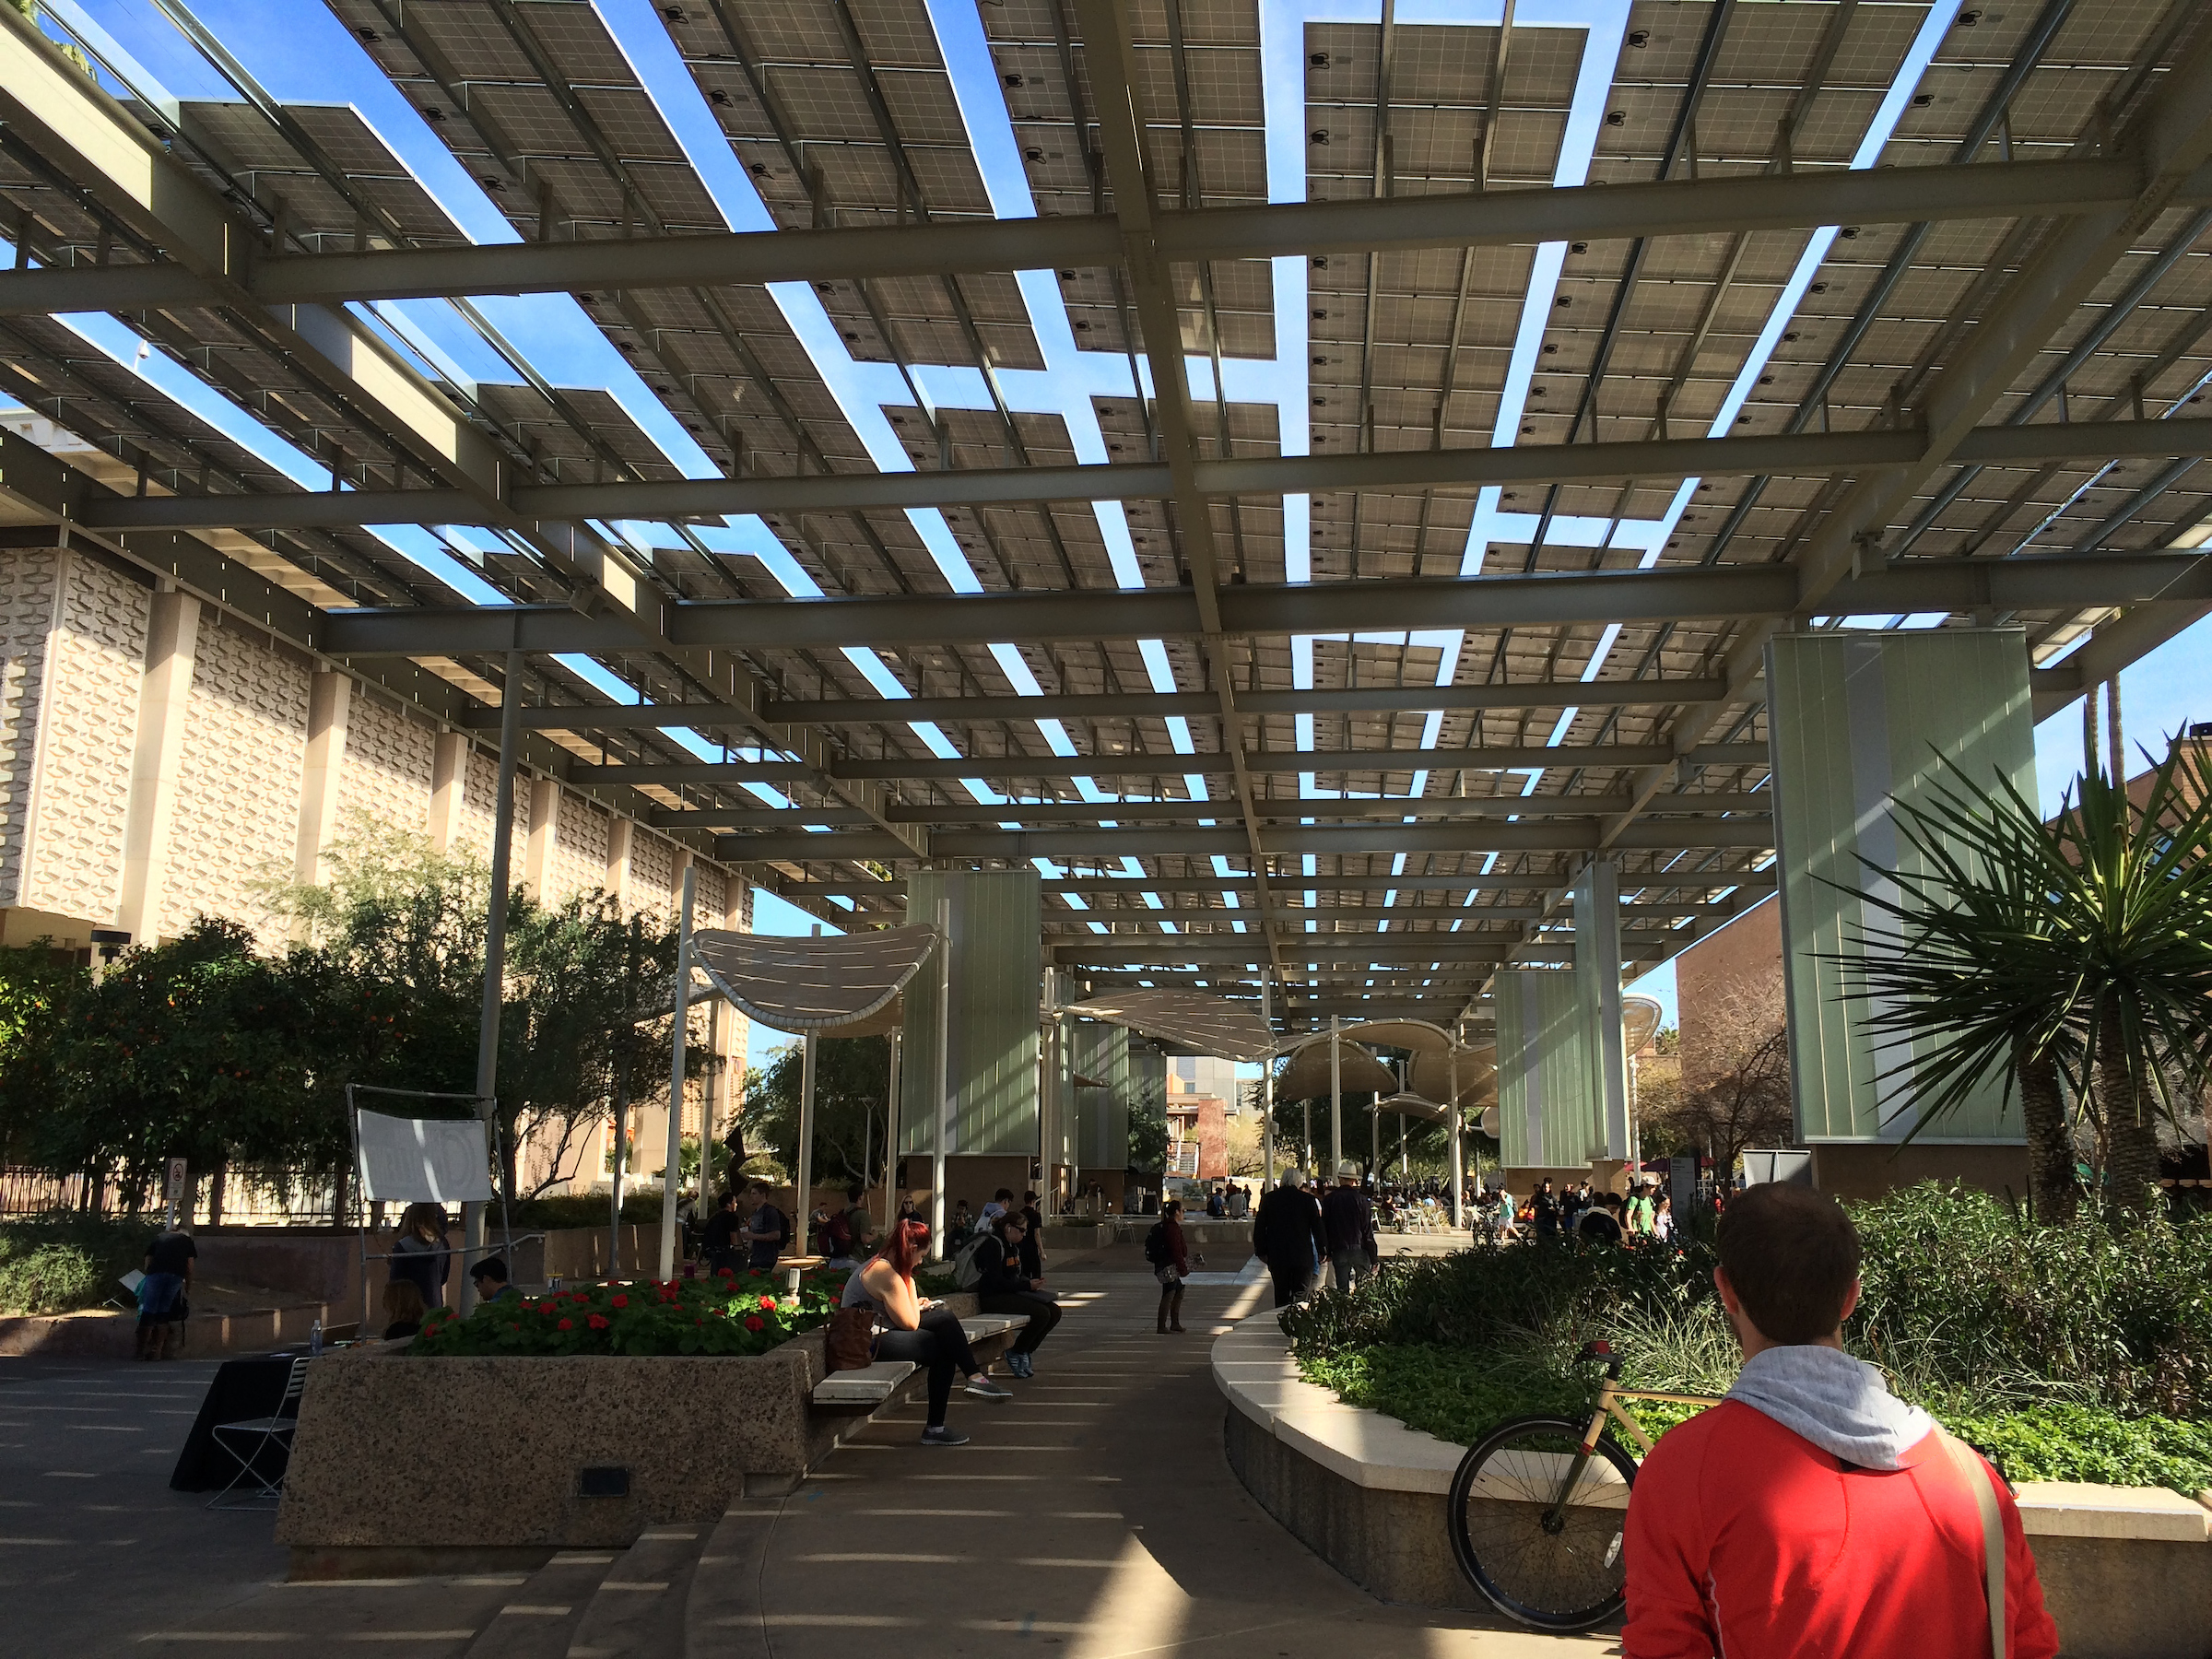 Campus mall with solar panels